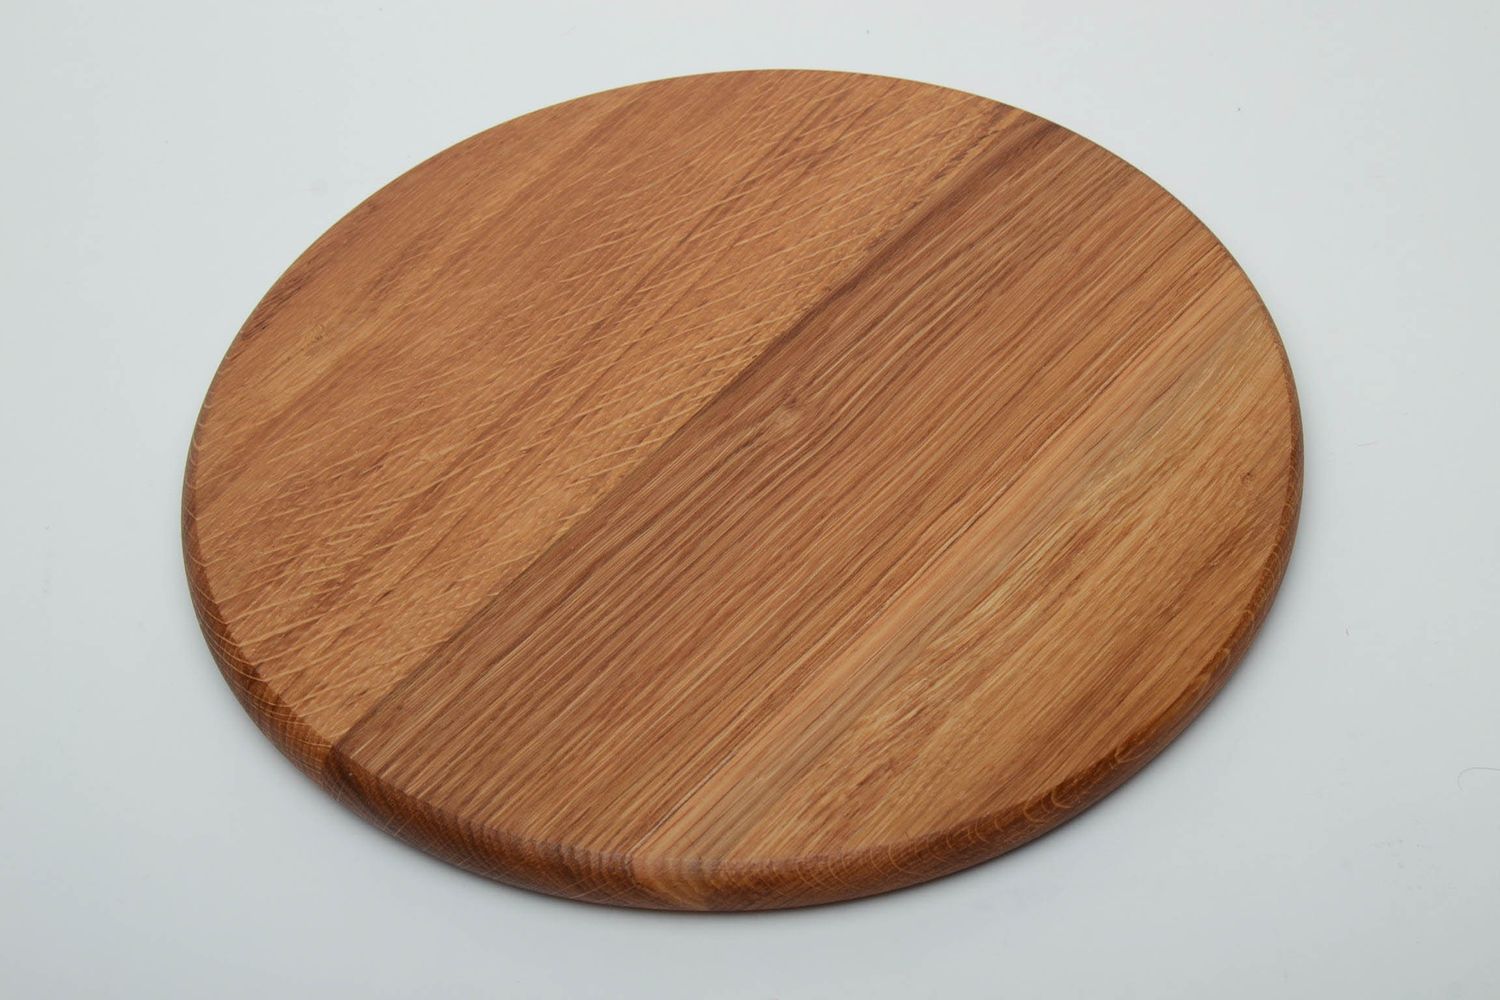 Wooden compartmental dish with 4 departments covered with linseed oil photo 4